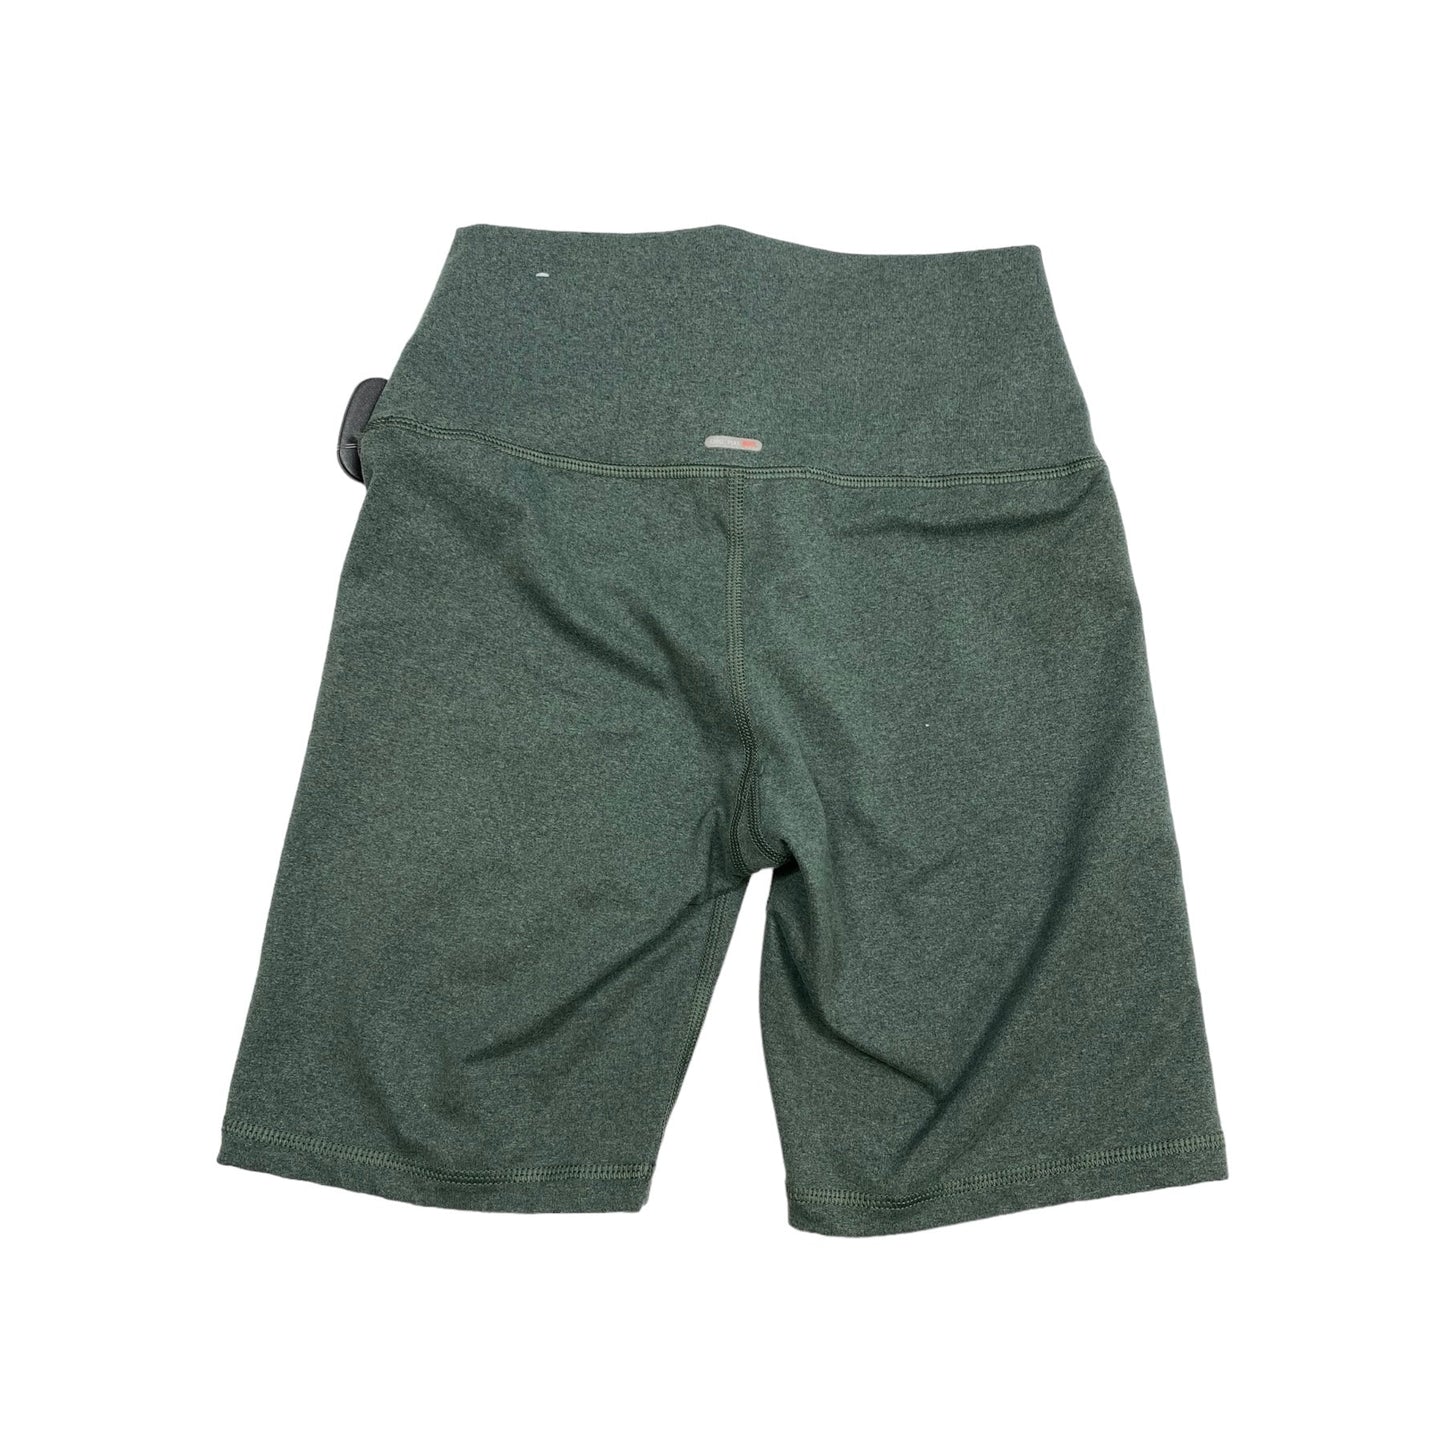 Green Athletic Shorts Aerie, Size S